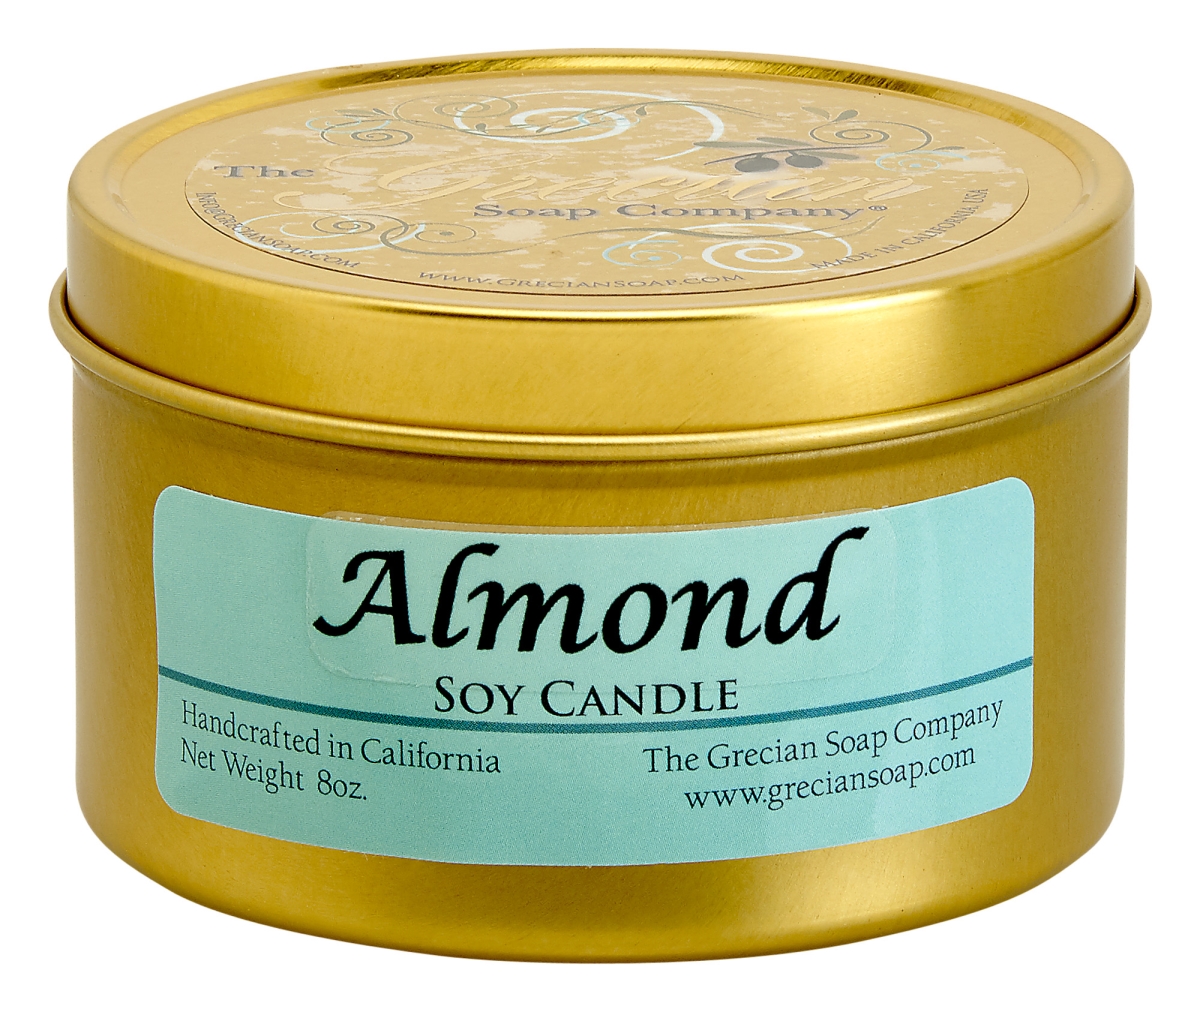 Picture of Greciansoap CAN-01 8 oz Almond Hand Poured Soy Candles